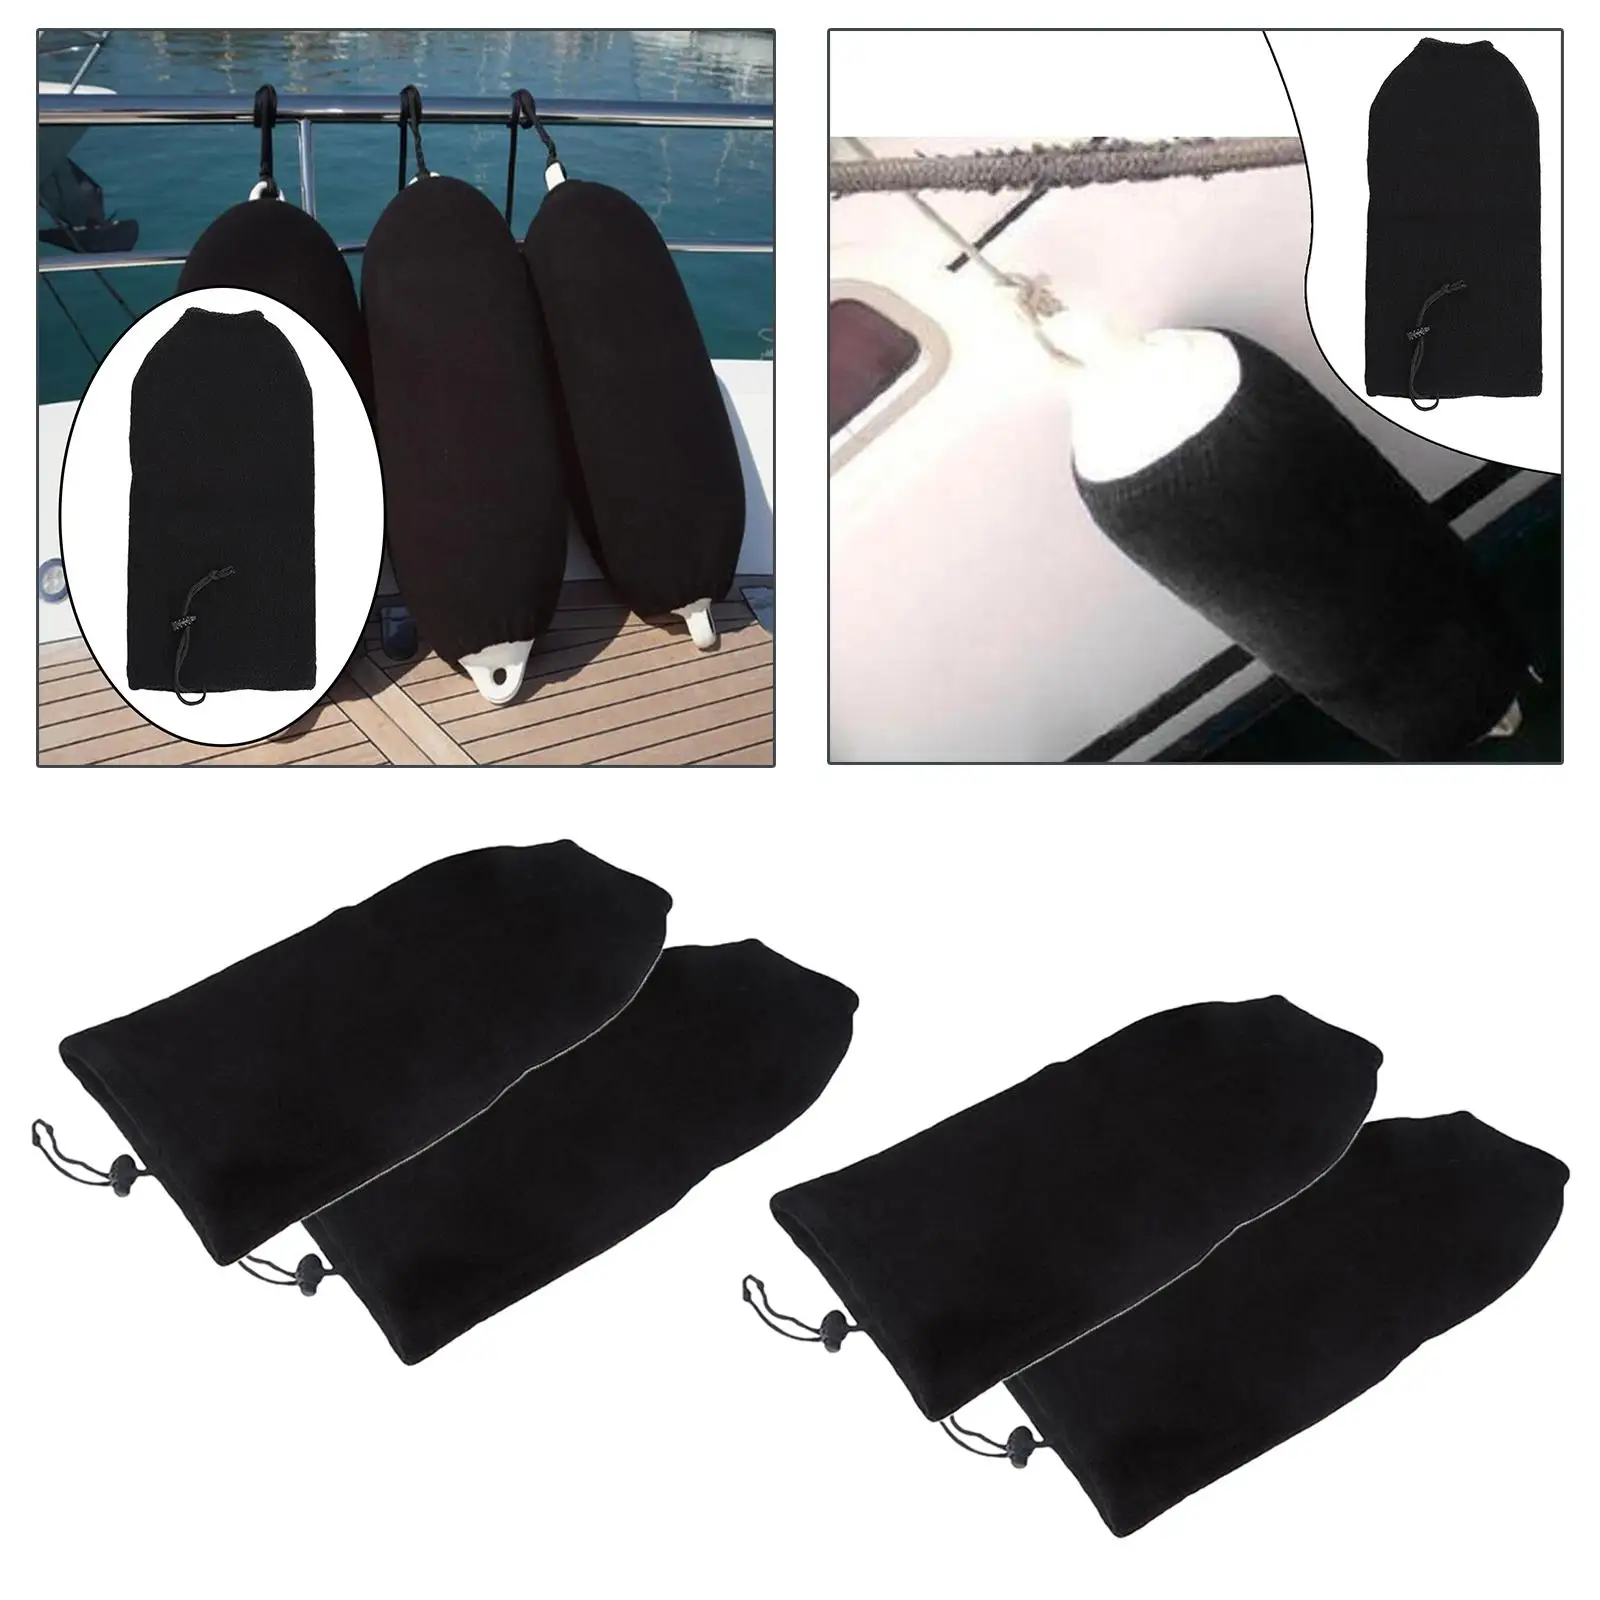 4x Boat Mudguard Covers Soft Woven Anti Collision Black Protector Fit for Marine